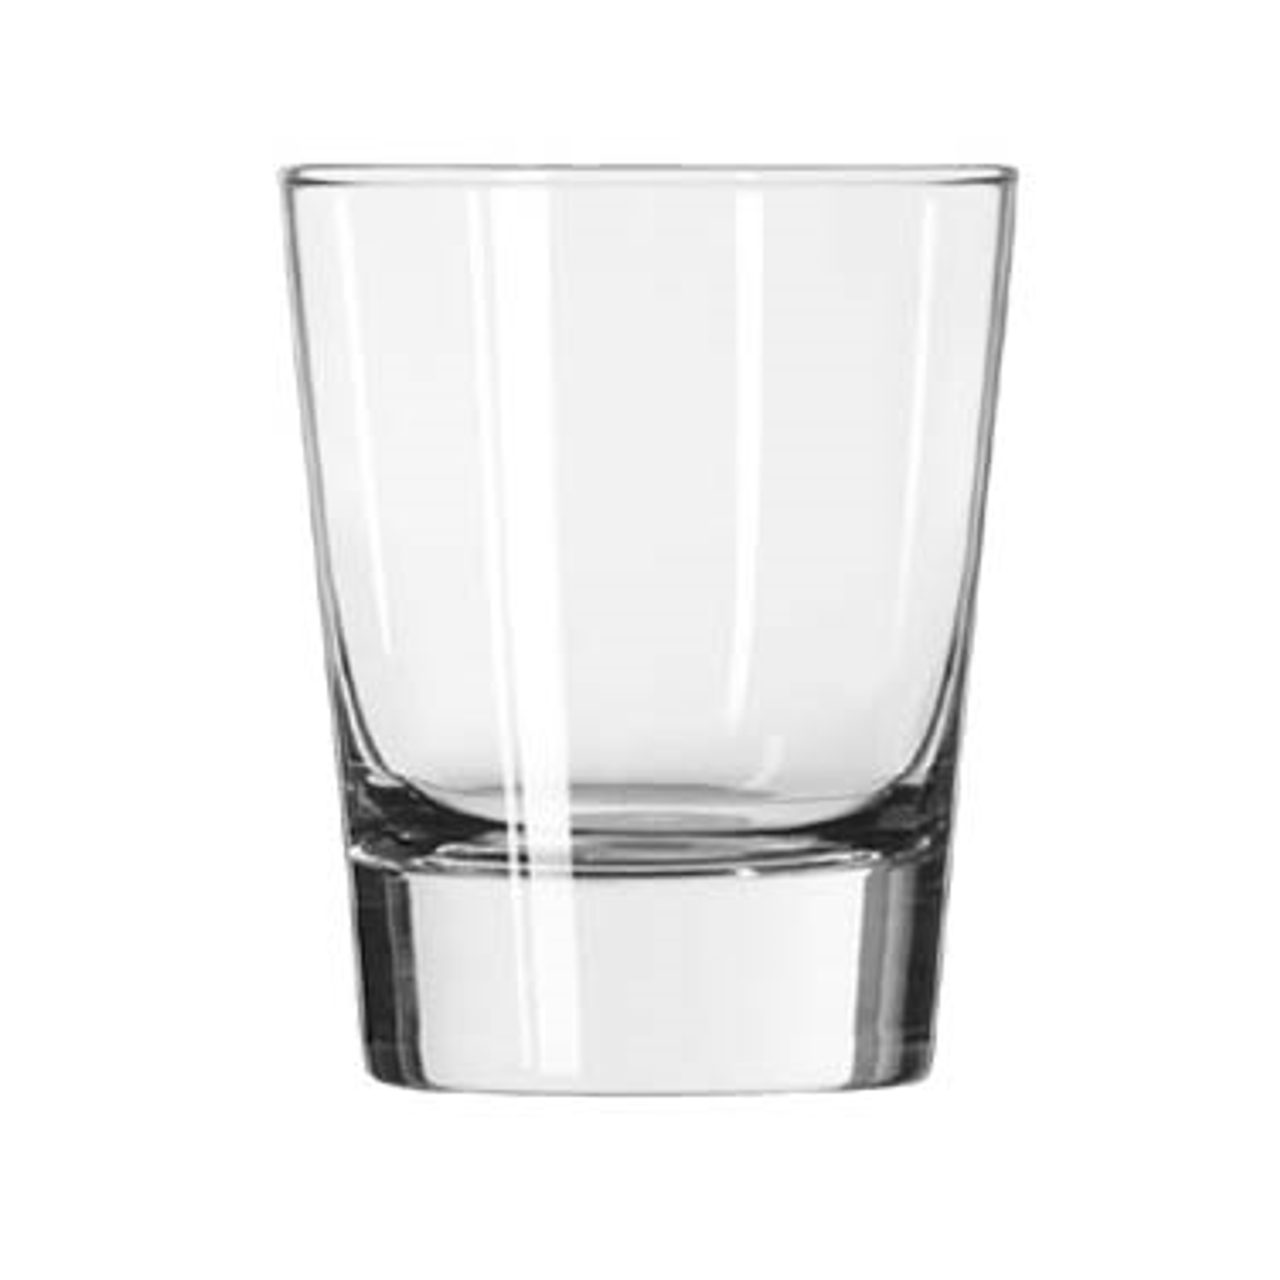 https://cdn11.bigcommerce.com/s-g3i86bef61/images/stencil/1280x1280/products/1081/4225/Libbey-2307-Geo-Double-Old-Fashioned-Glass__90525.1667492625.png?c=1